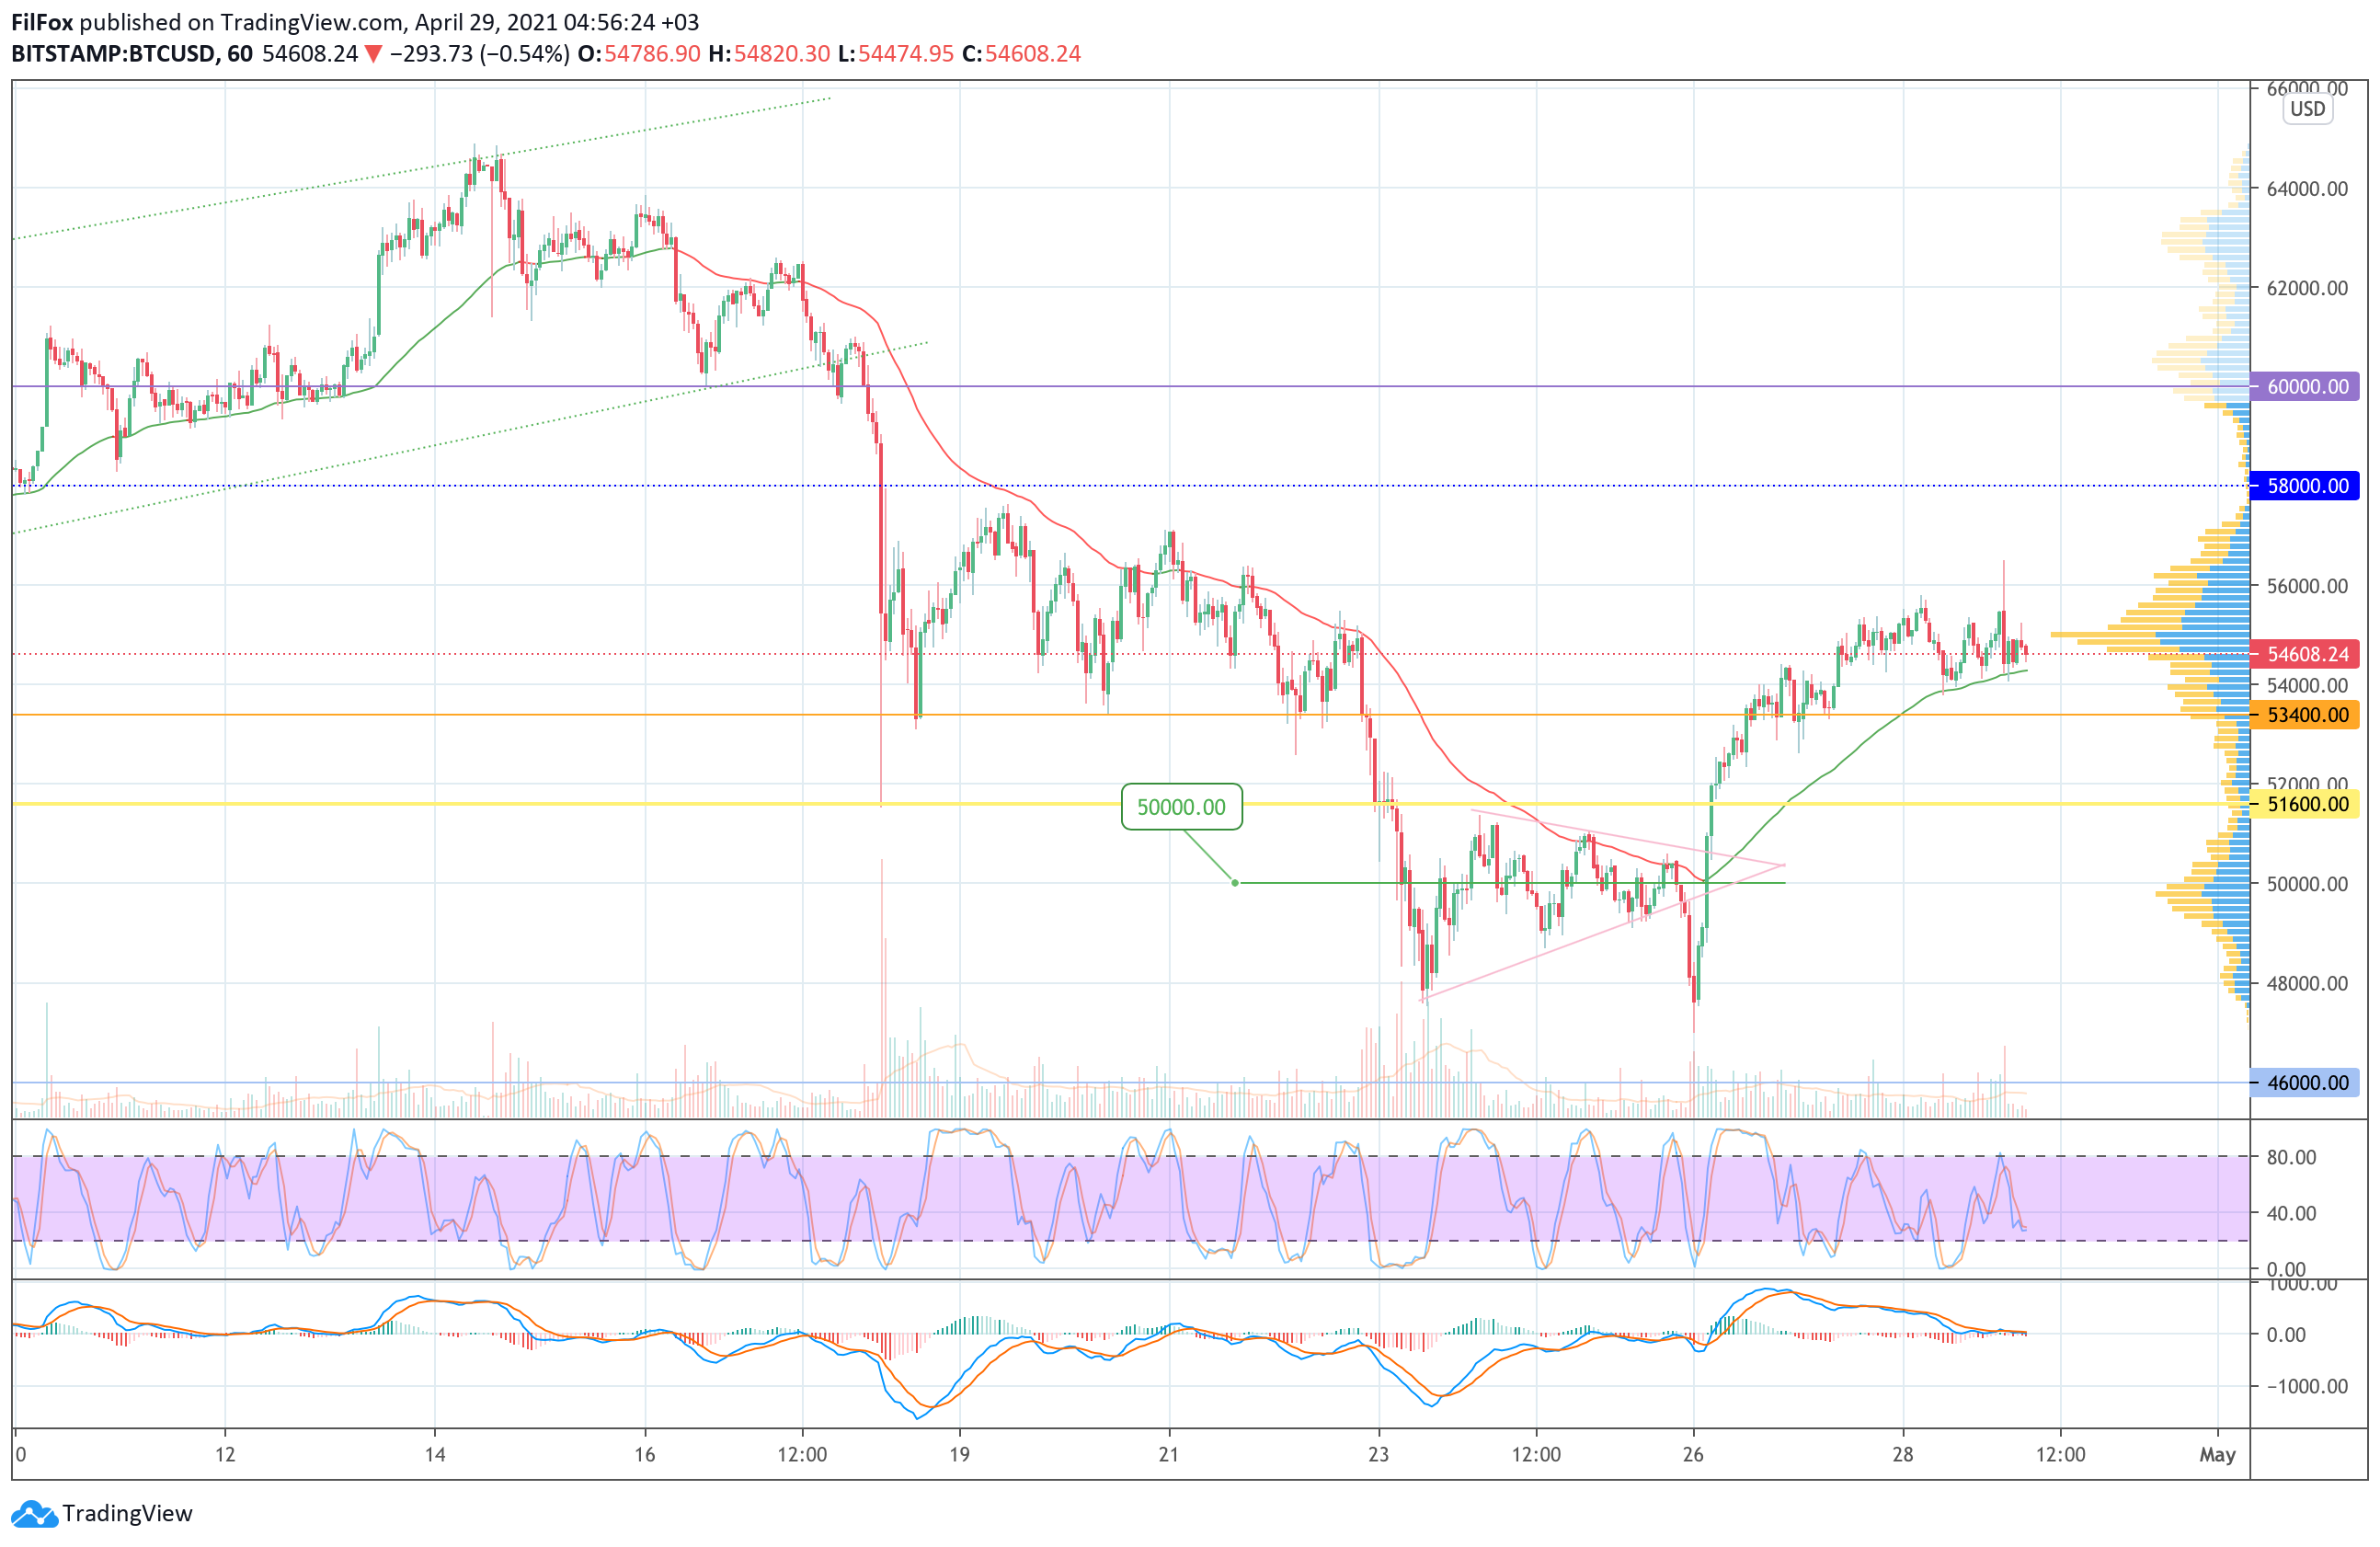 Analysis of the prices of Bitcoin, Ethereum, XRP for 04/29/2021